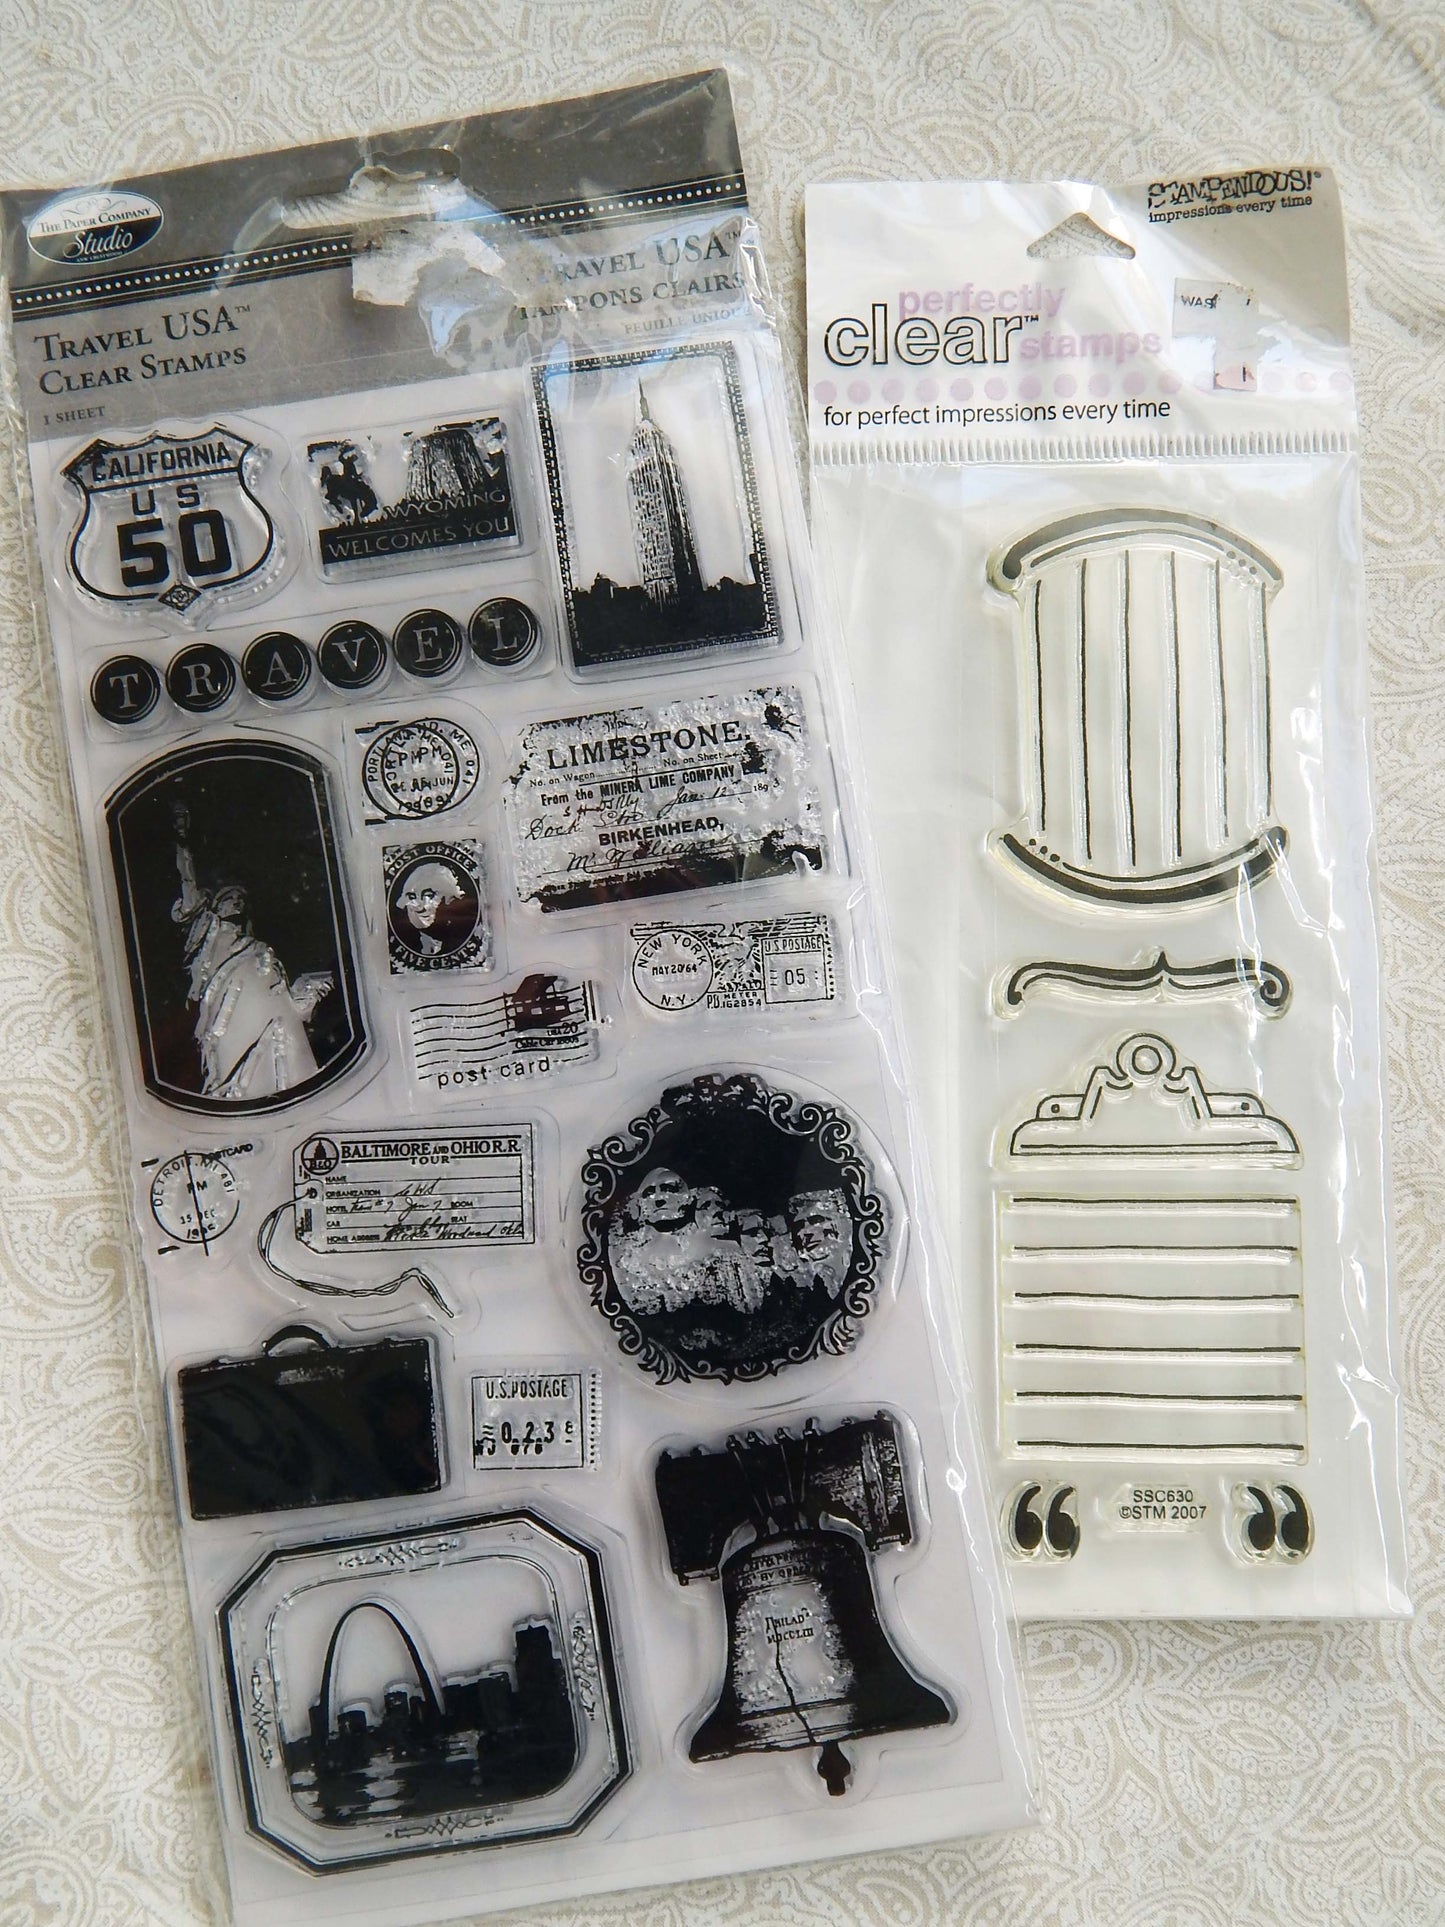 BRAND NEW! Travel and POSTMARKS, Clipboard and LABEL Clear CLING STAMP SET